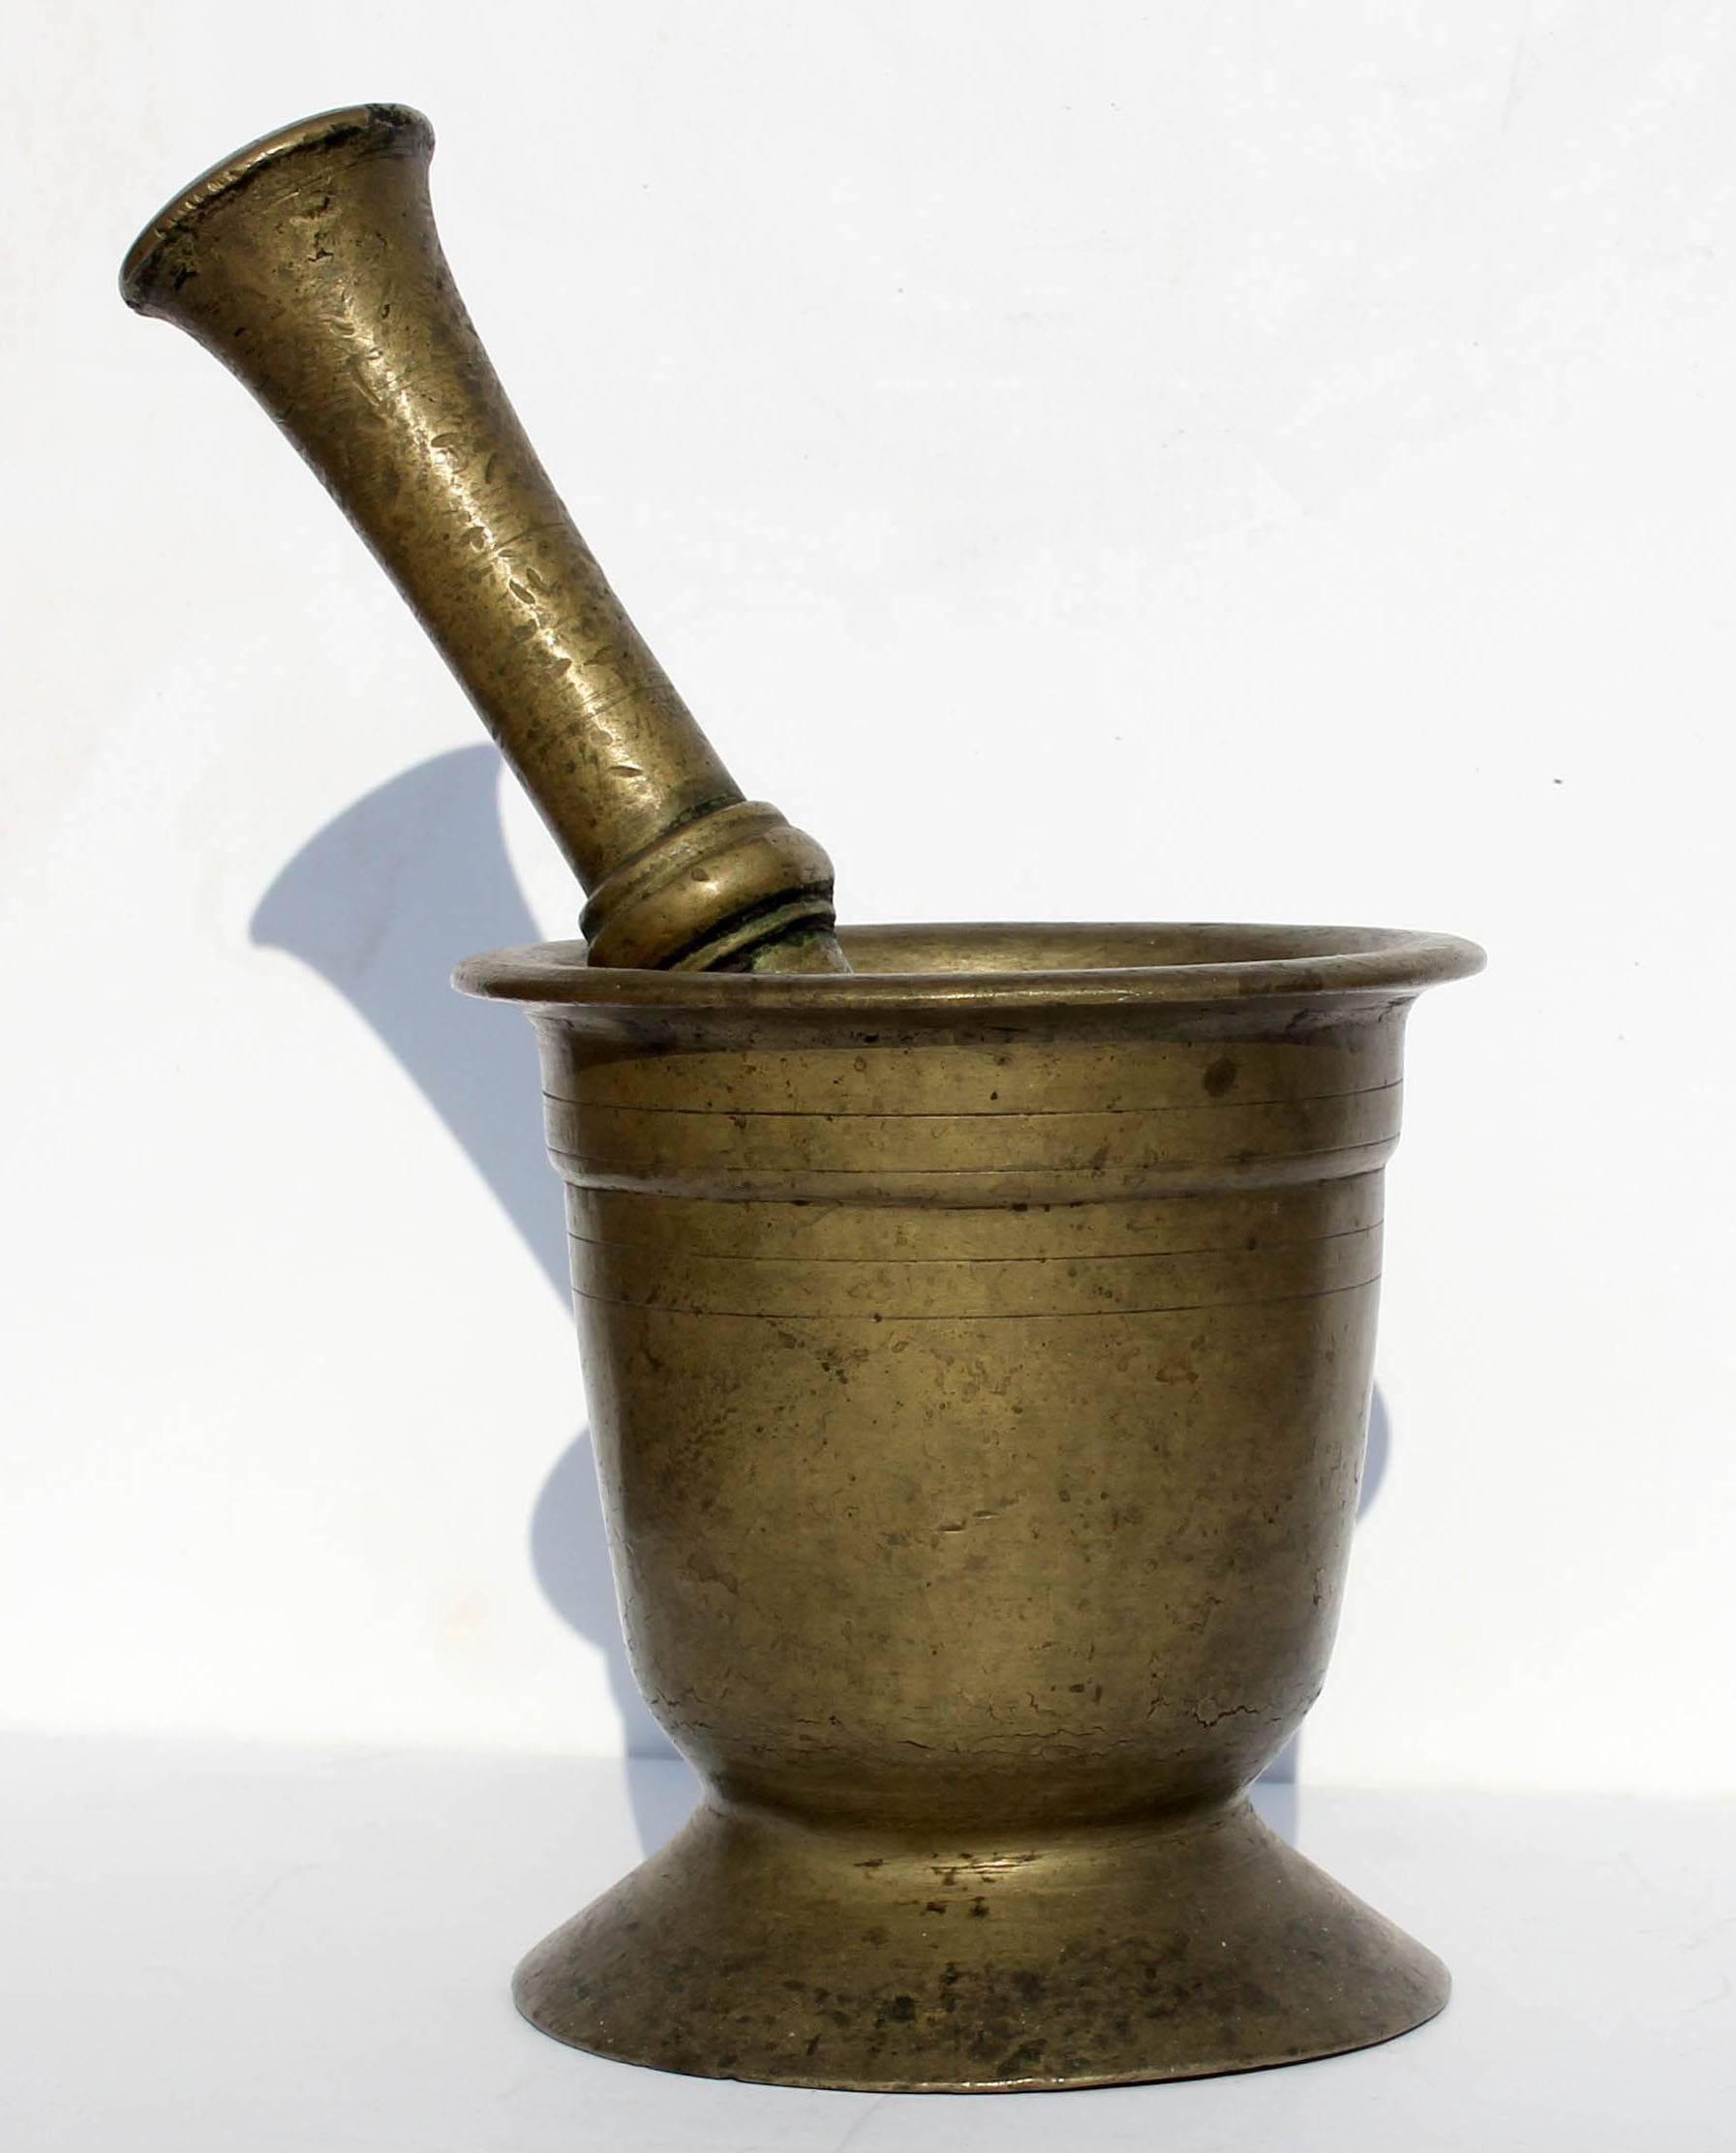 18th century brass mortar and pestle. Very heavy casting. Lots of great old wear.